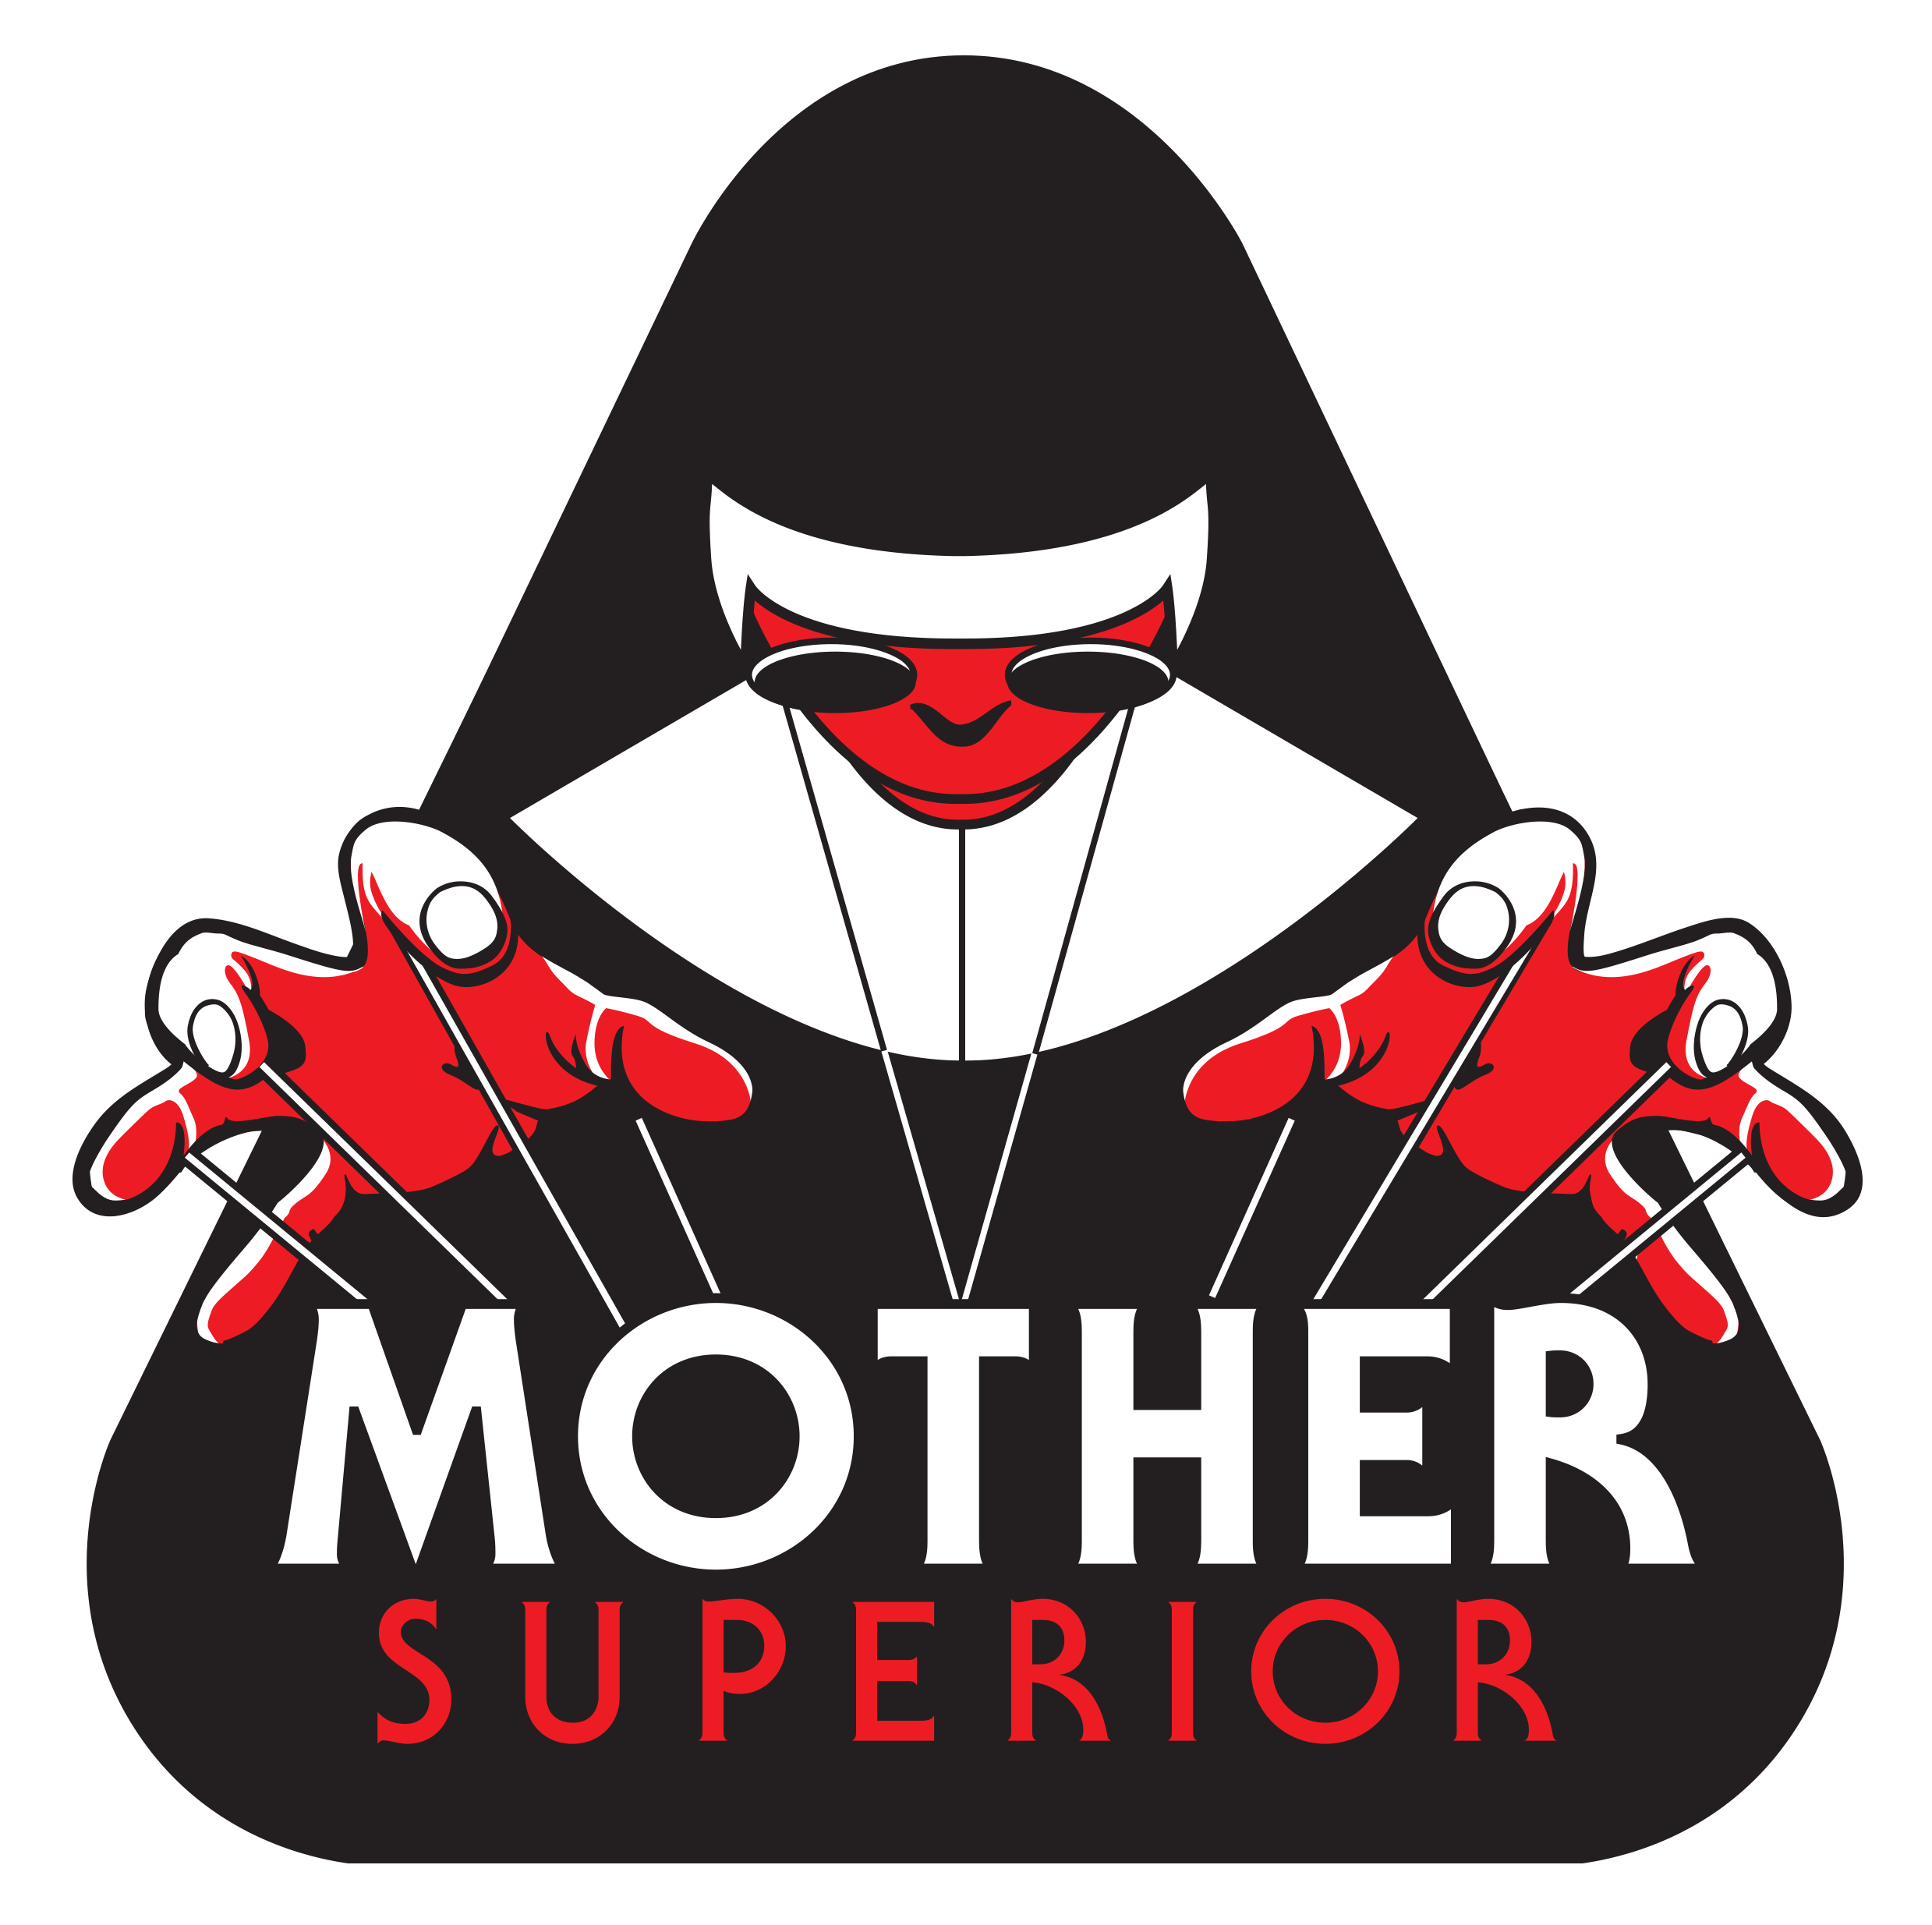 MOTHER SUPERIOR